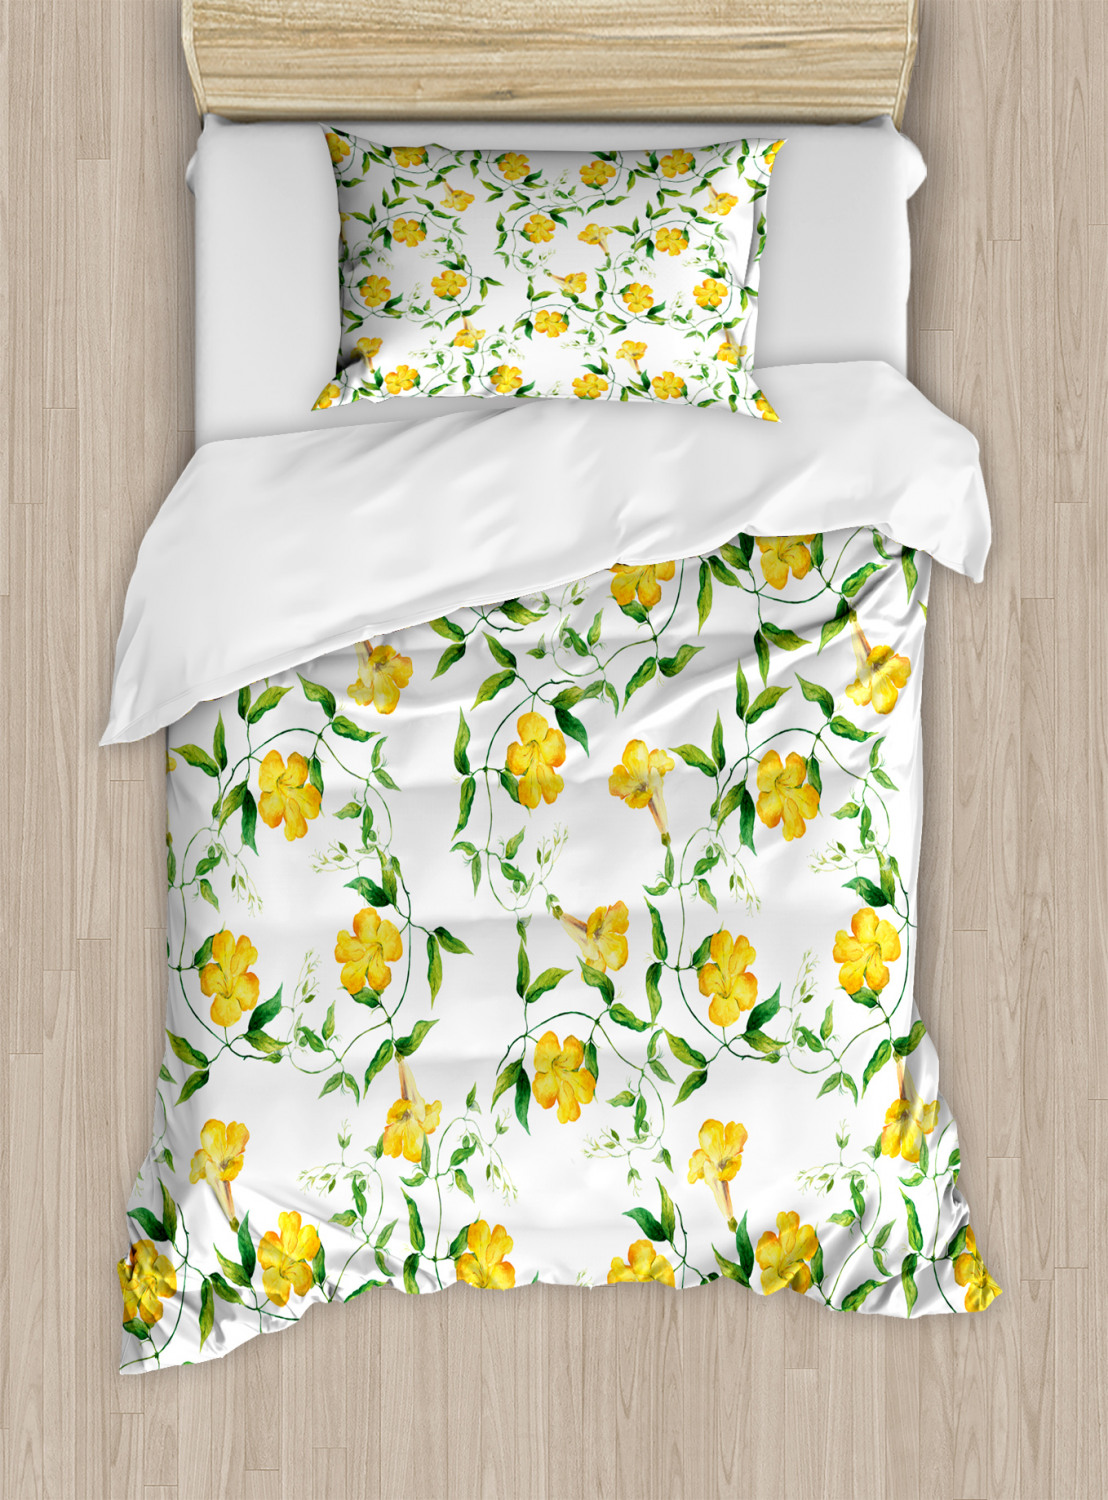 Yellow Flower Duvet Cover Set Twin Queen King Sizes With Pillow